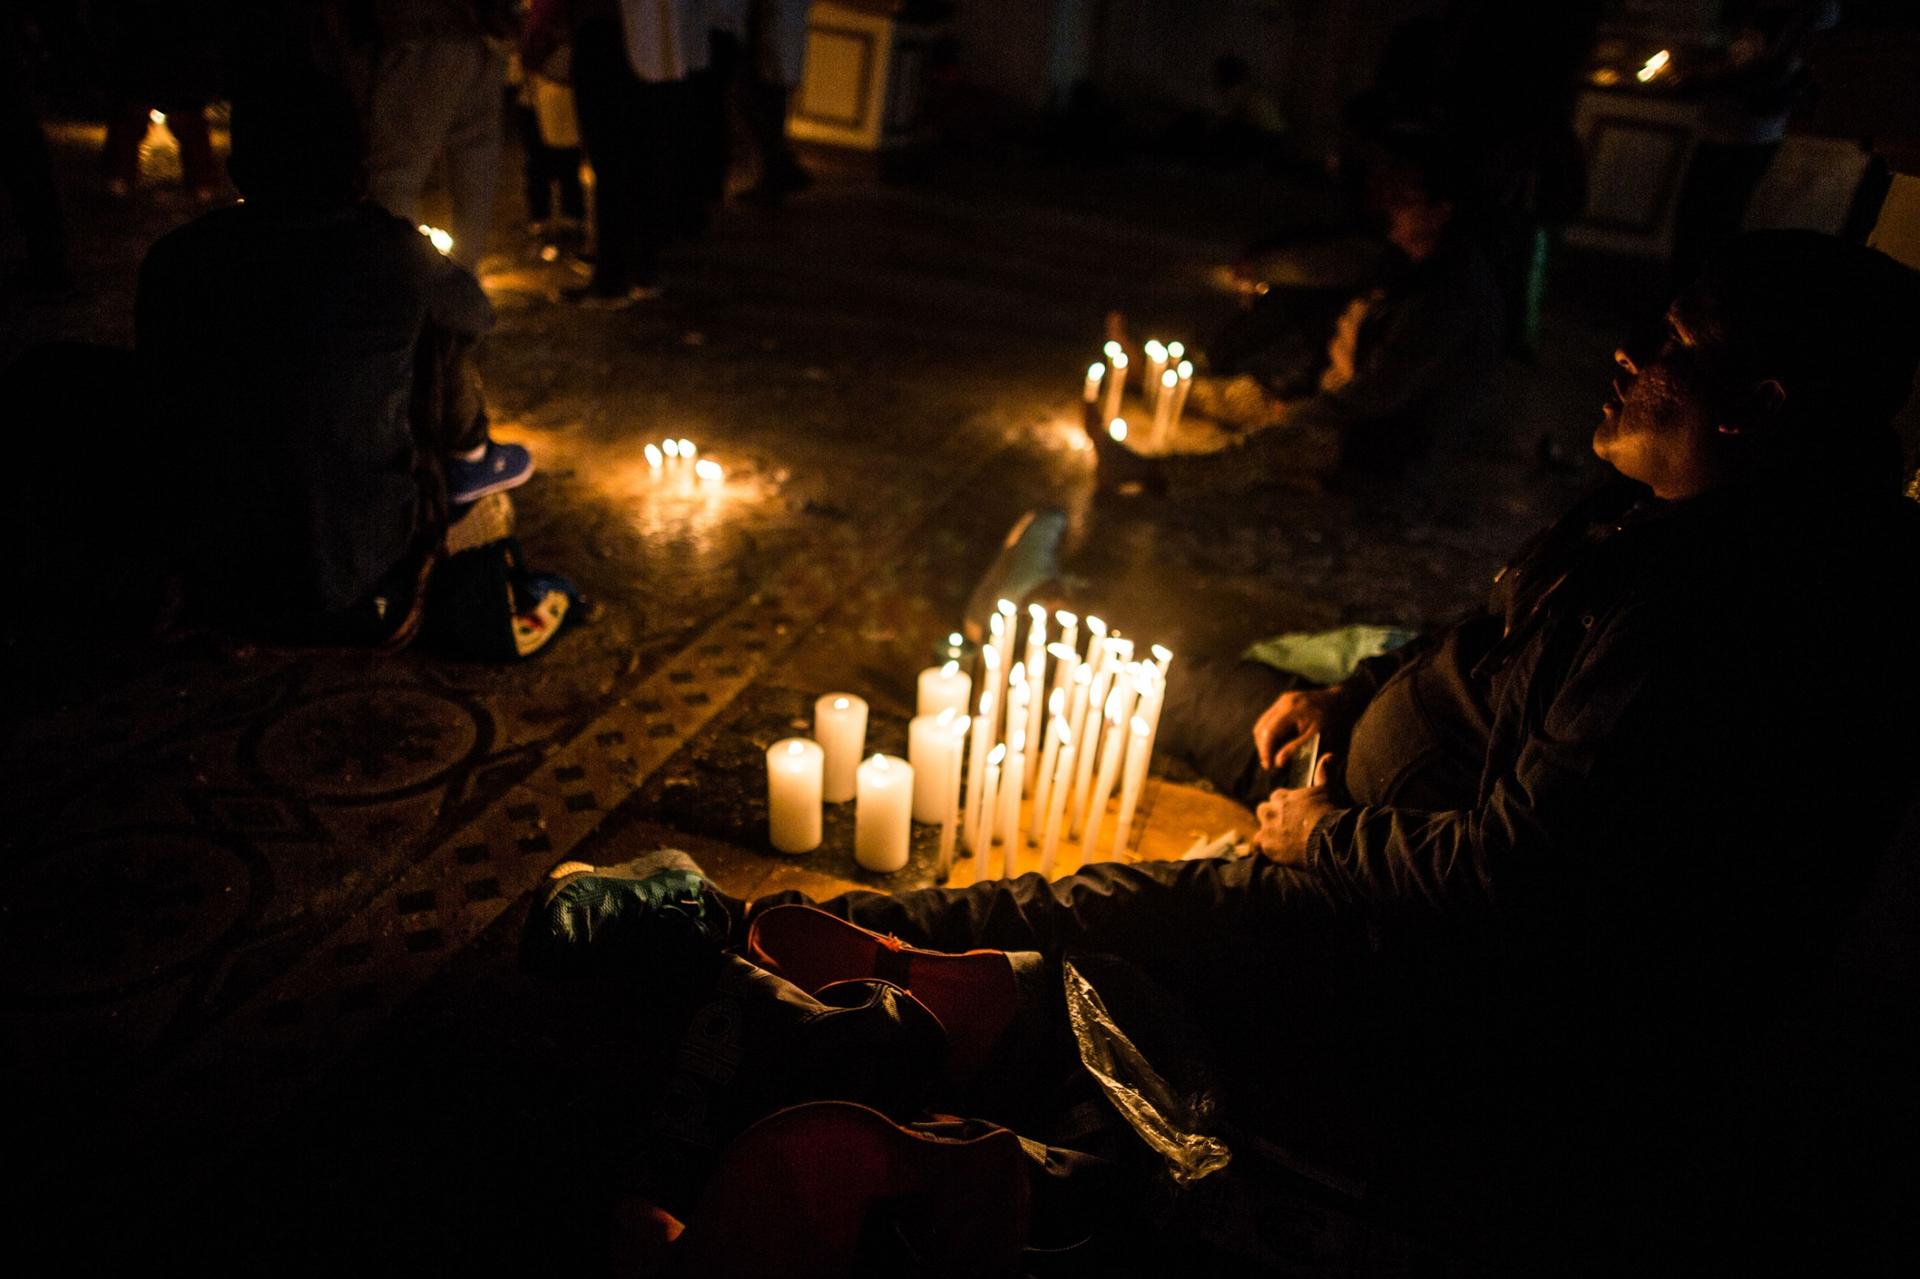 A person is shown sitting on the ground with their legs on either side of a display of several lit candles.